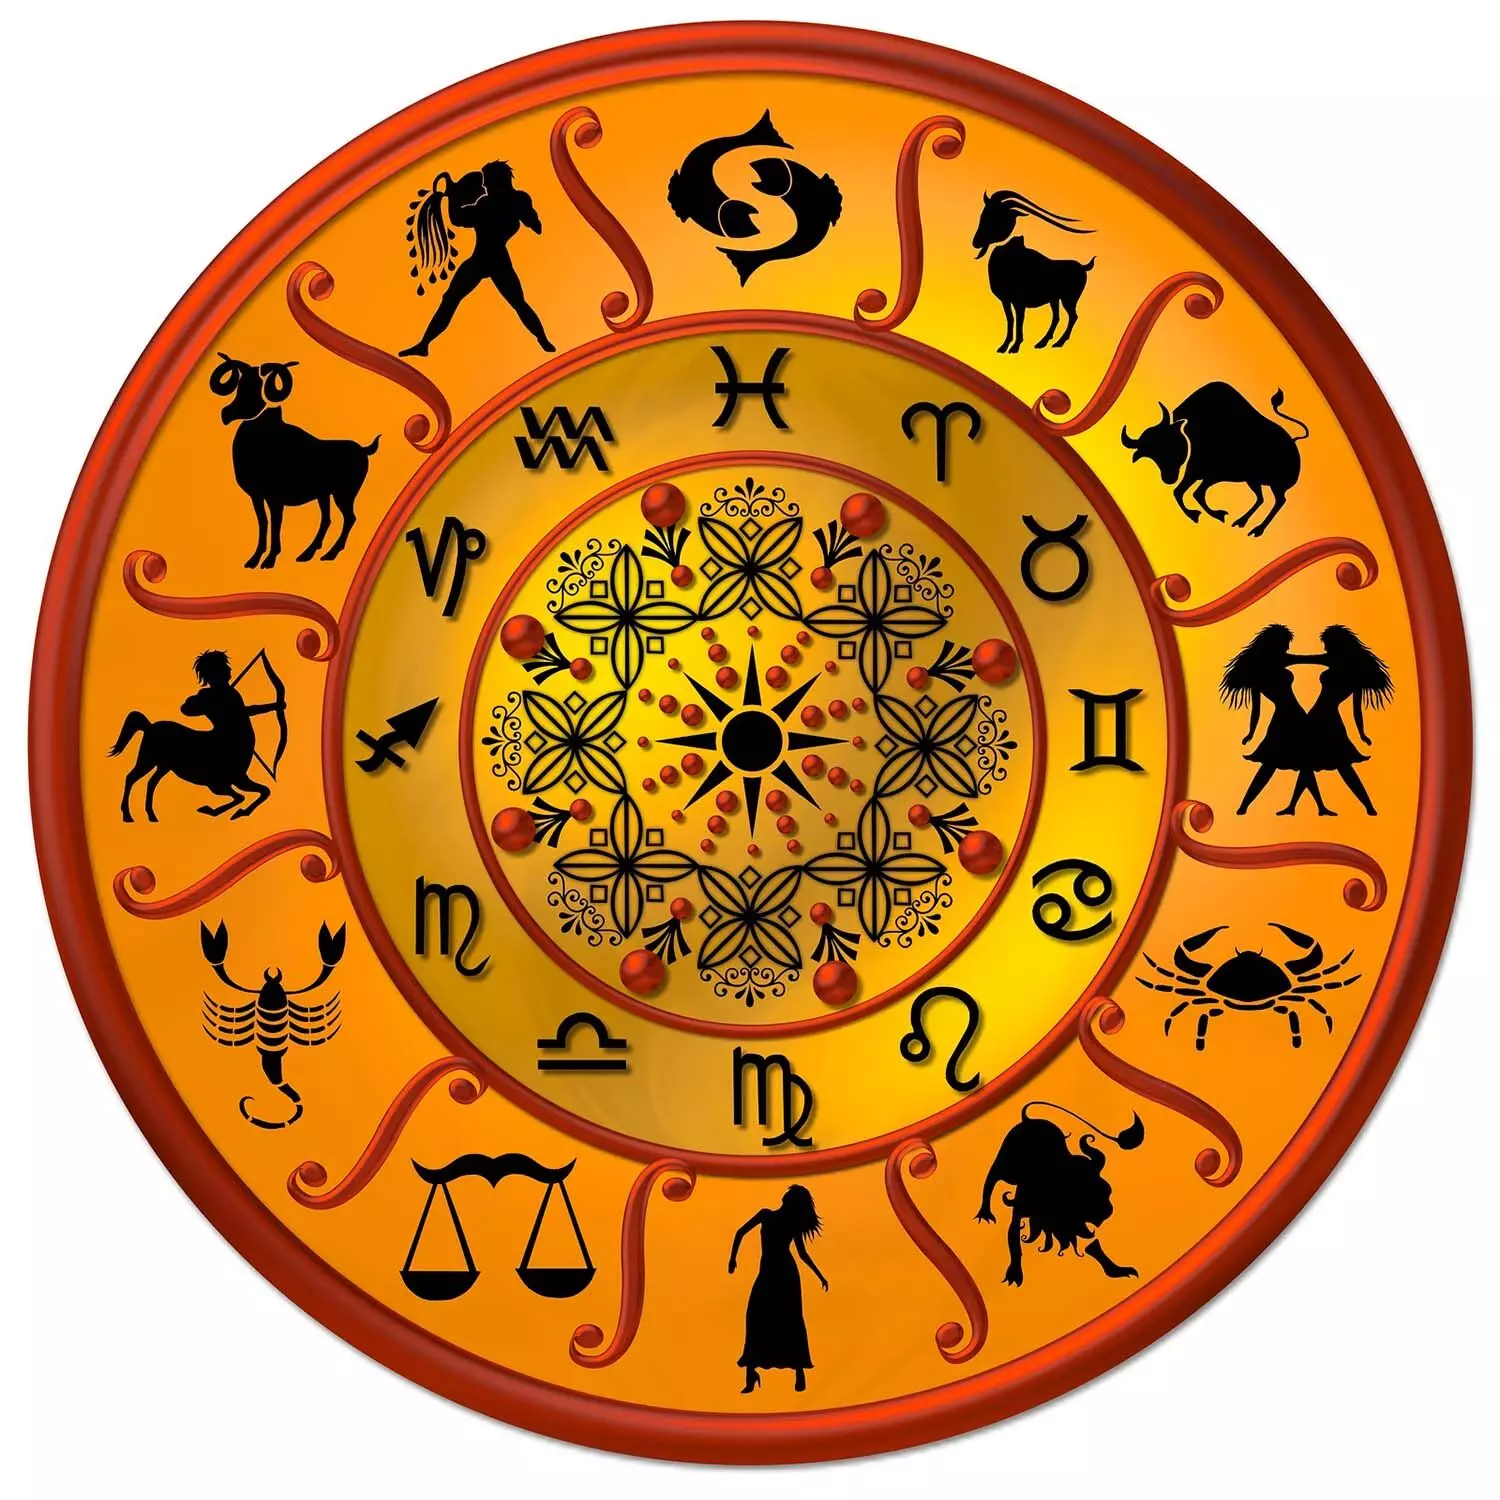 16 July – Know your todays horoscope